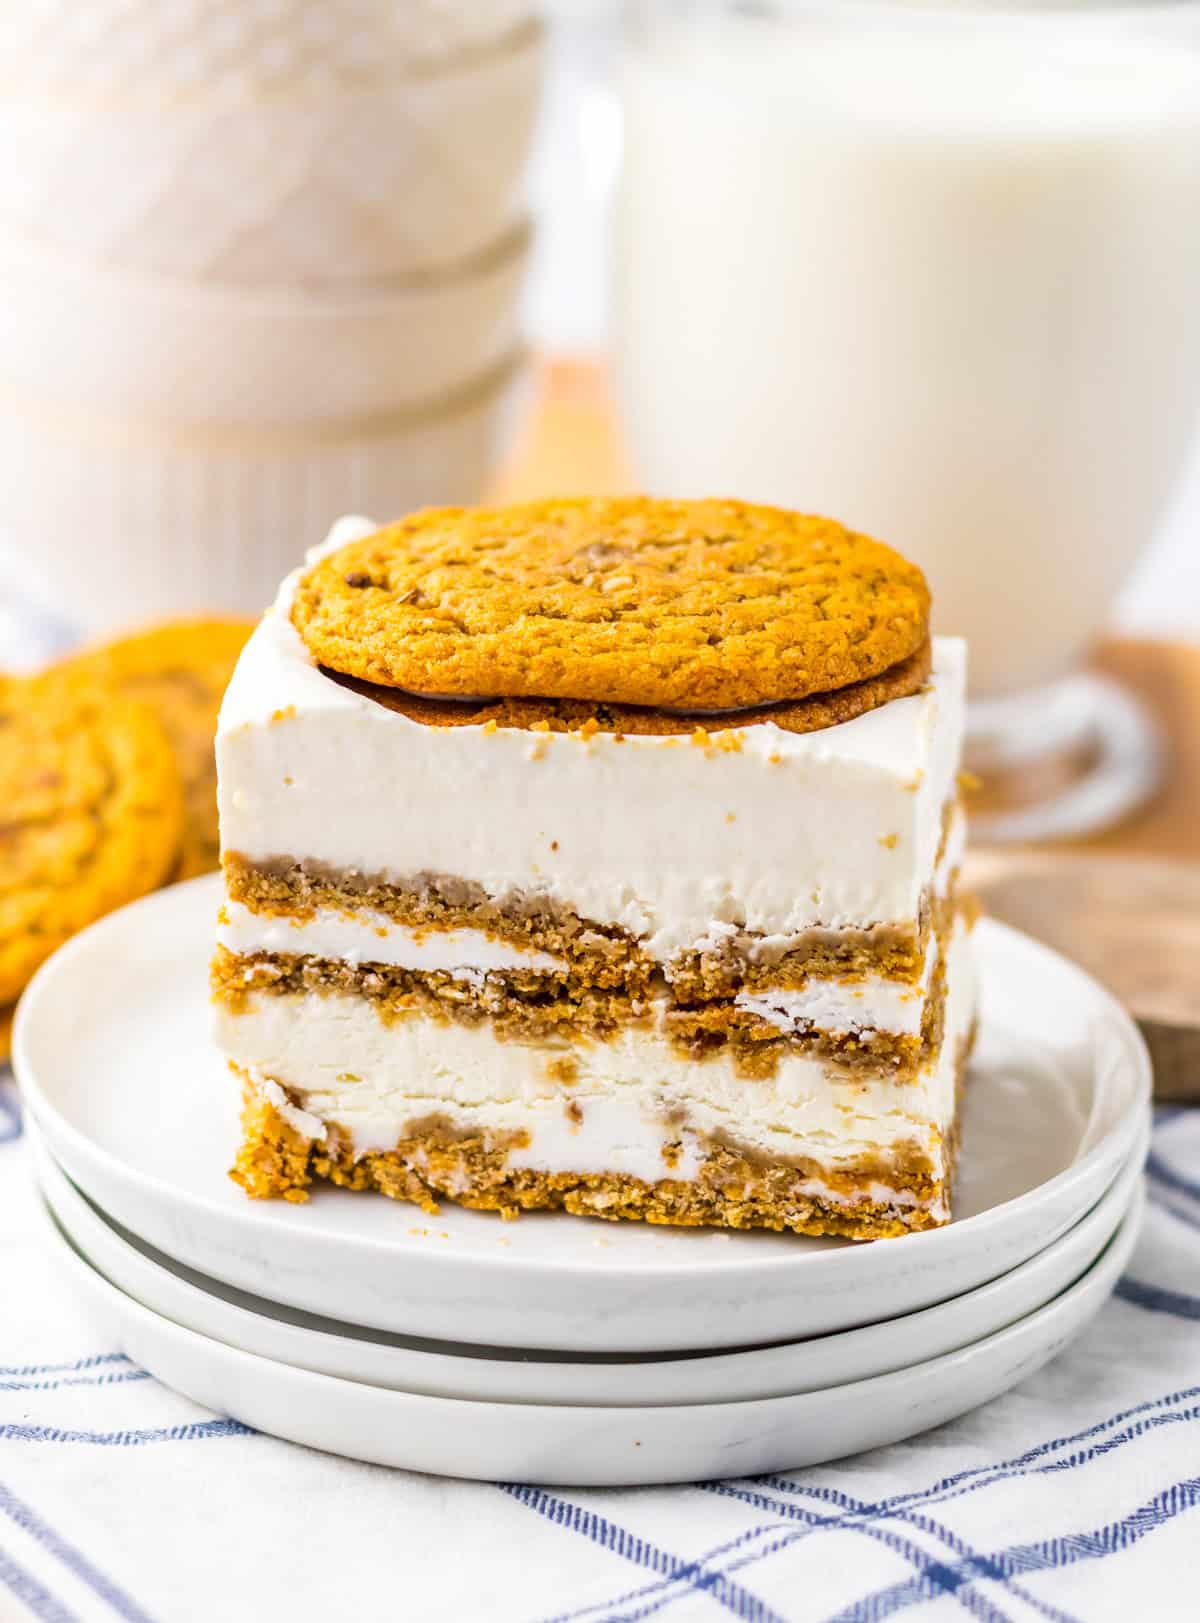 One of the Oatmeal Cream Pie Ice Cream Sandwiches on stacked white plates showing the layers of oatmeal cream pies with milk in background.